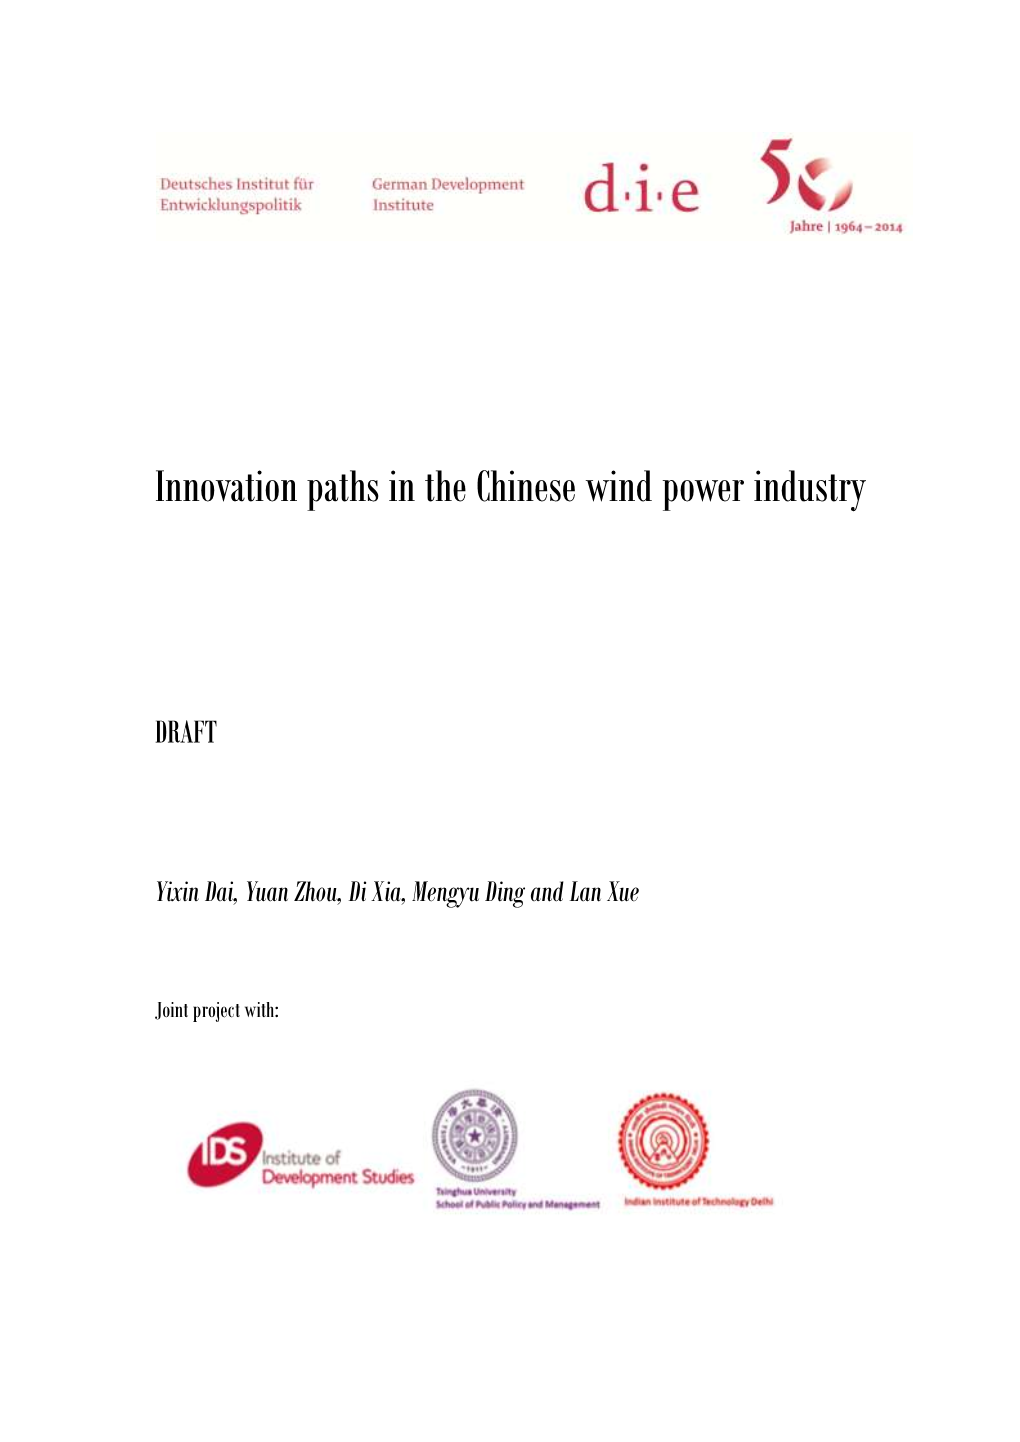 Innovation Paths in the Chinese Wind Power Industry